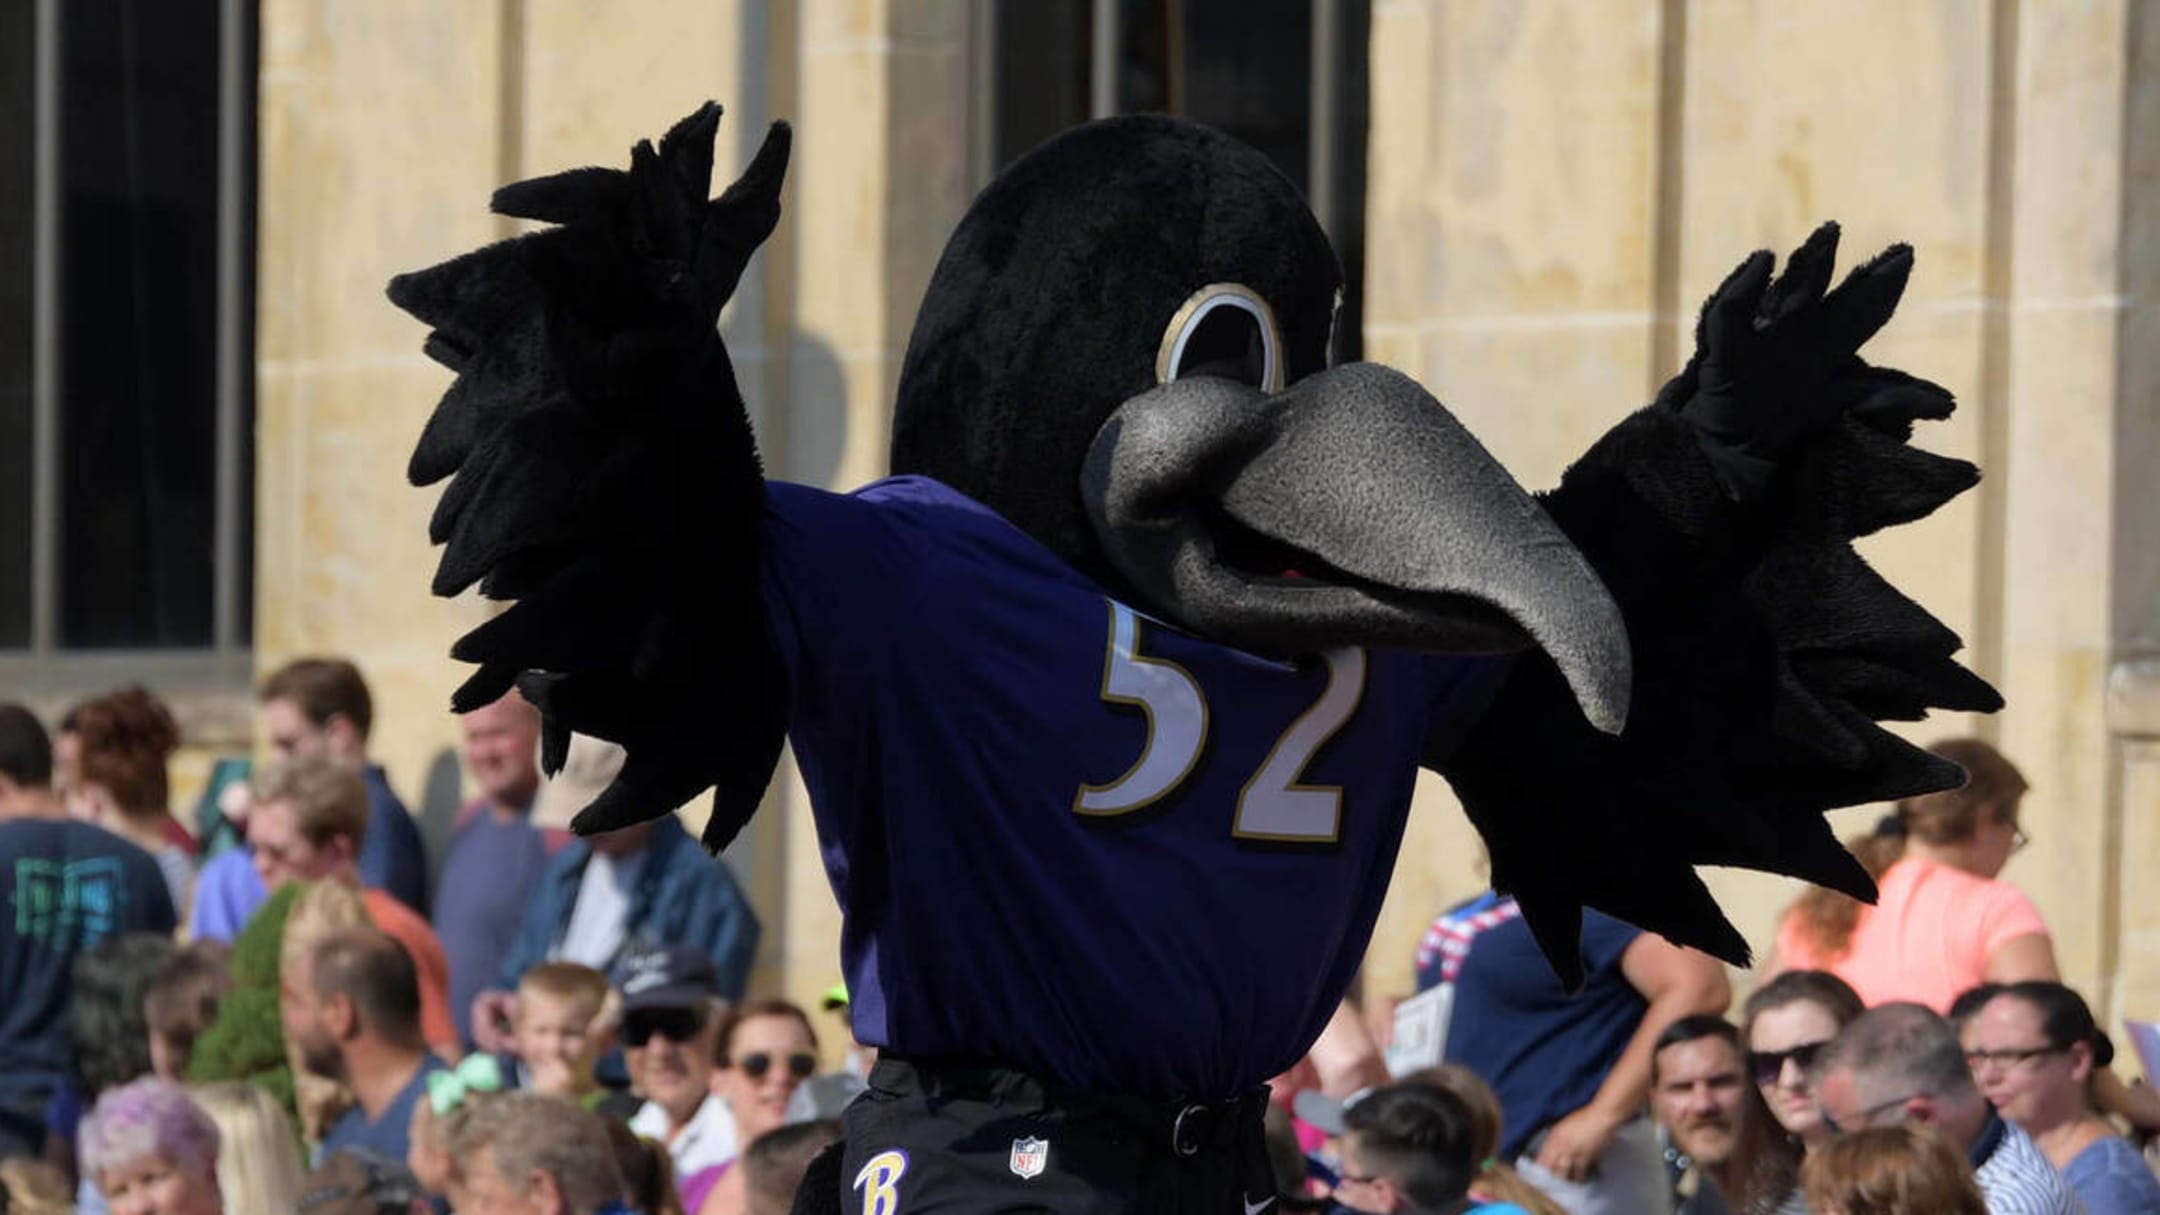 Watch: Ravens' mascot suffers knee injury during halftime show